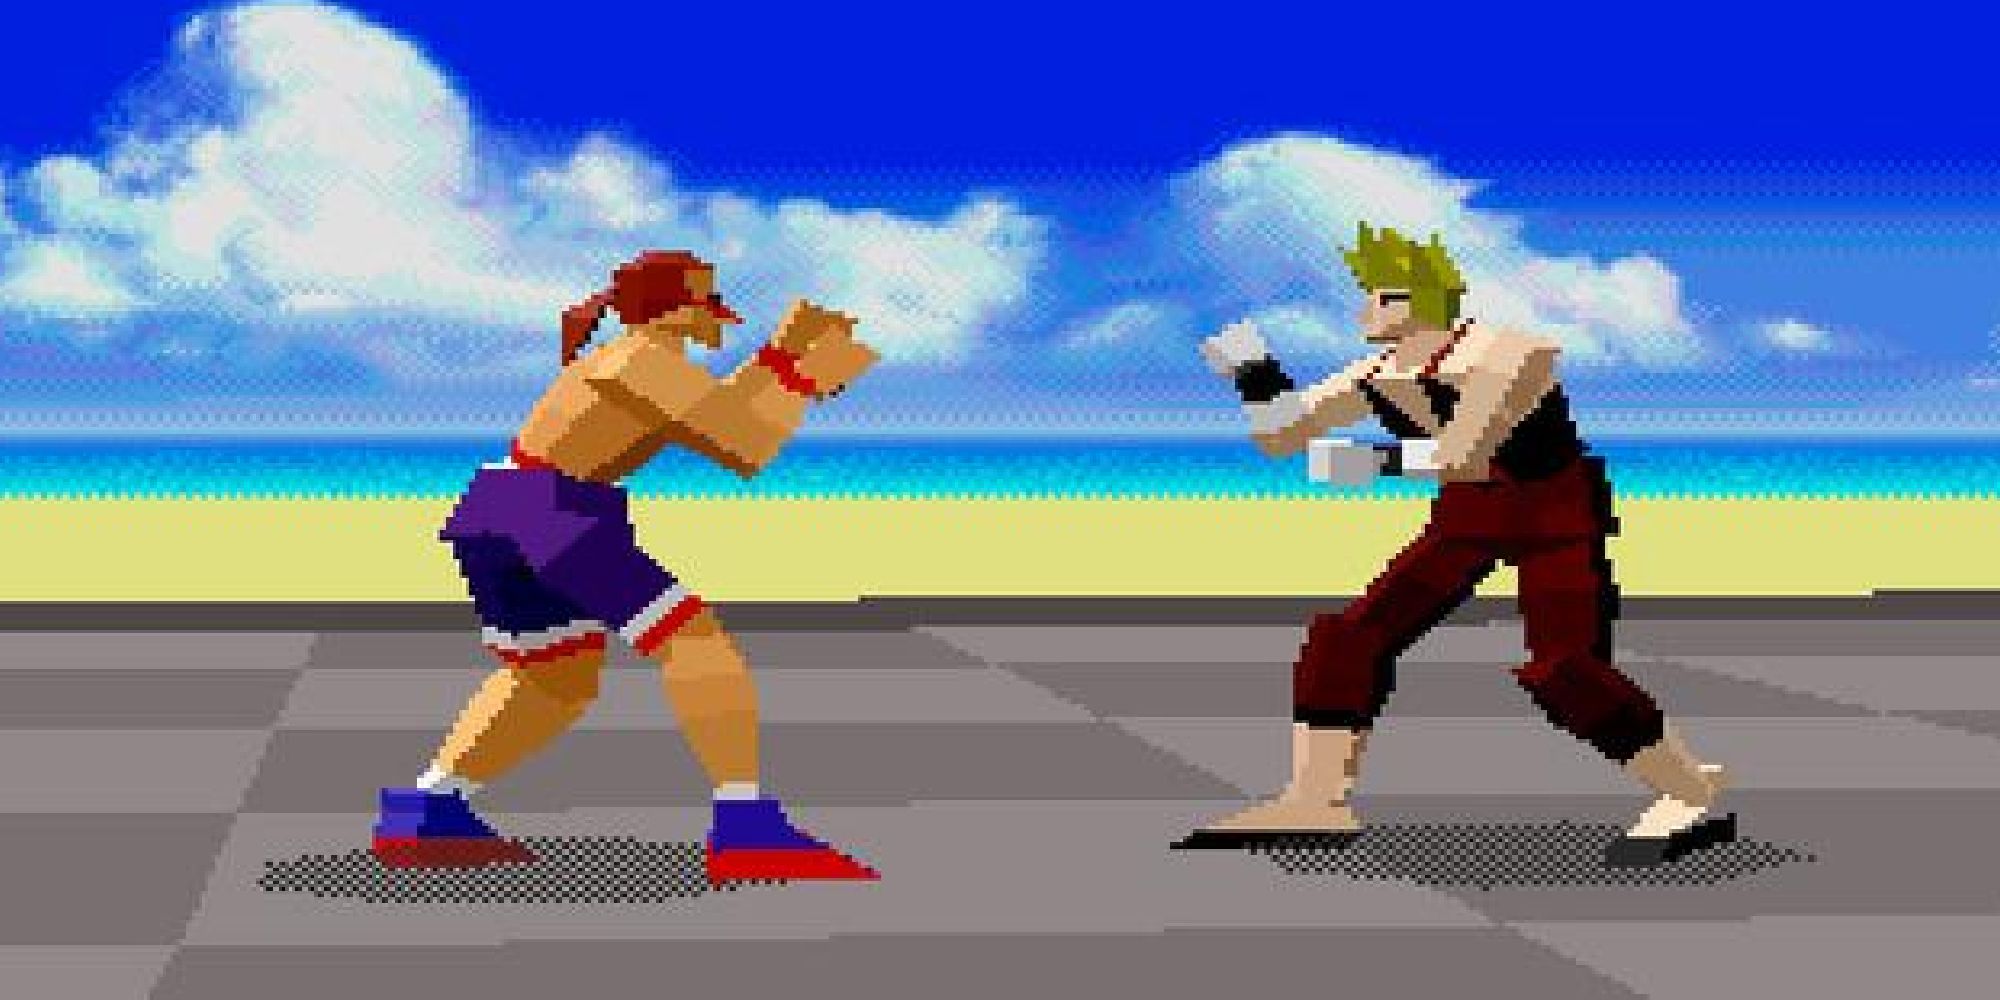 Two fighters facing each other in Virtua Fighter